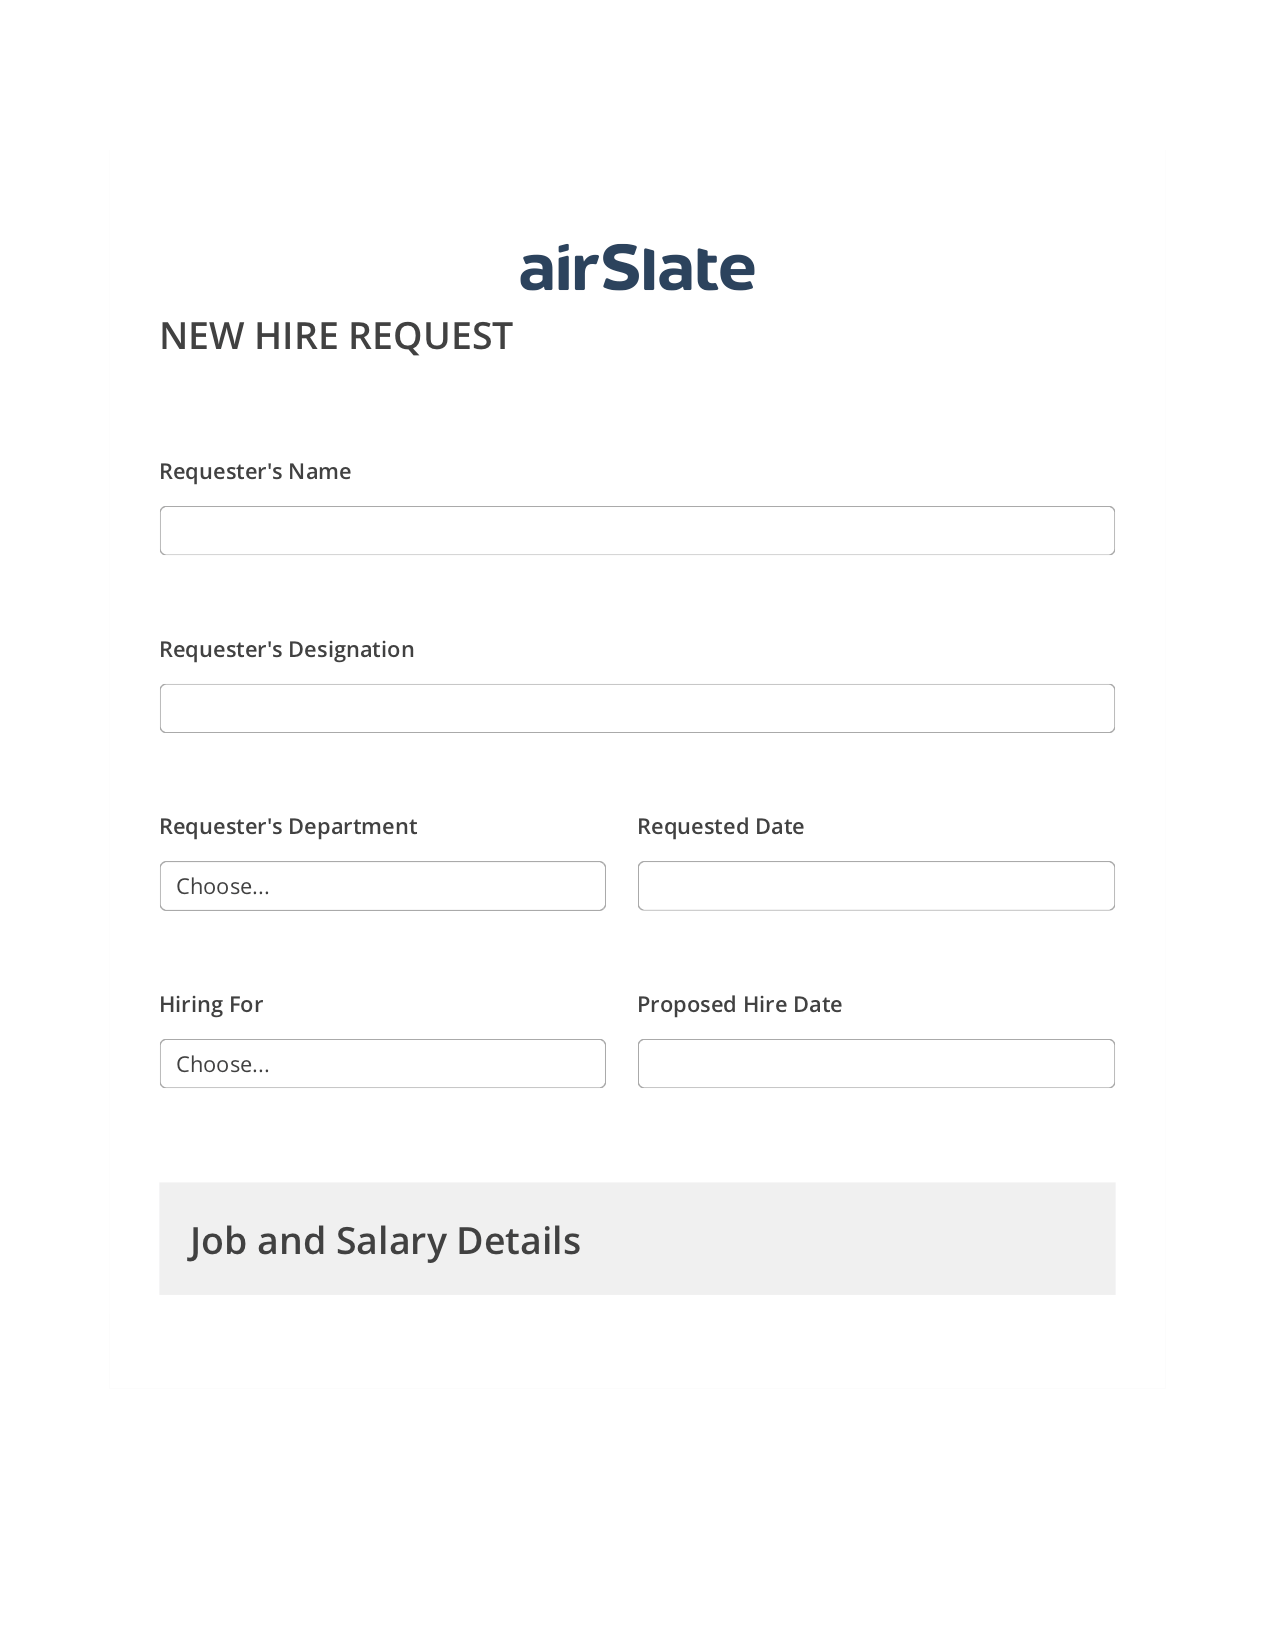 Hiring Request Workflow Pre-fill Dropdowns from Excel Bot, Hide Signatures Bot, Archive to SharePoint Folder Bot